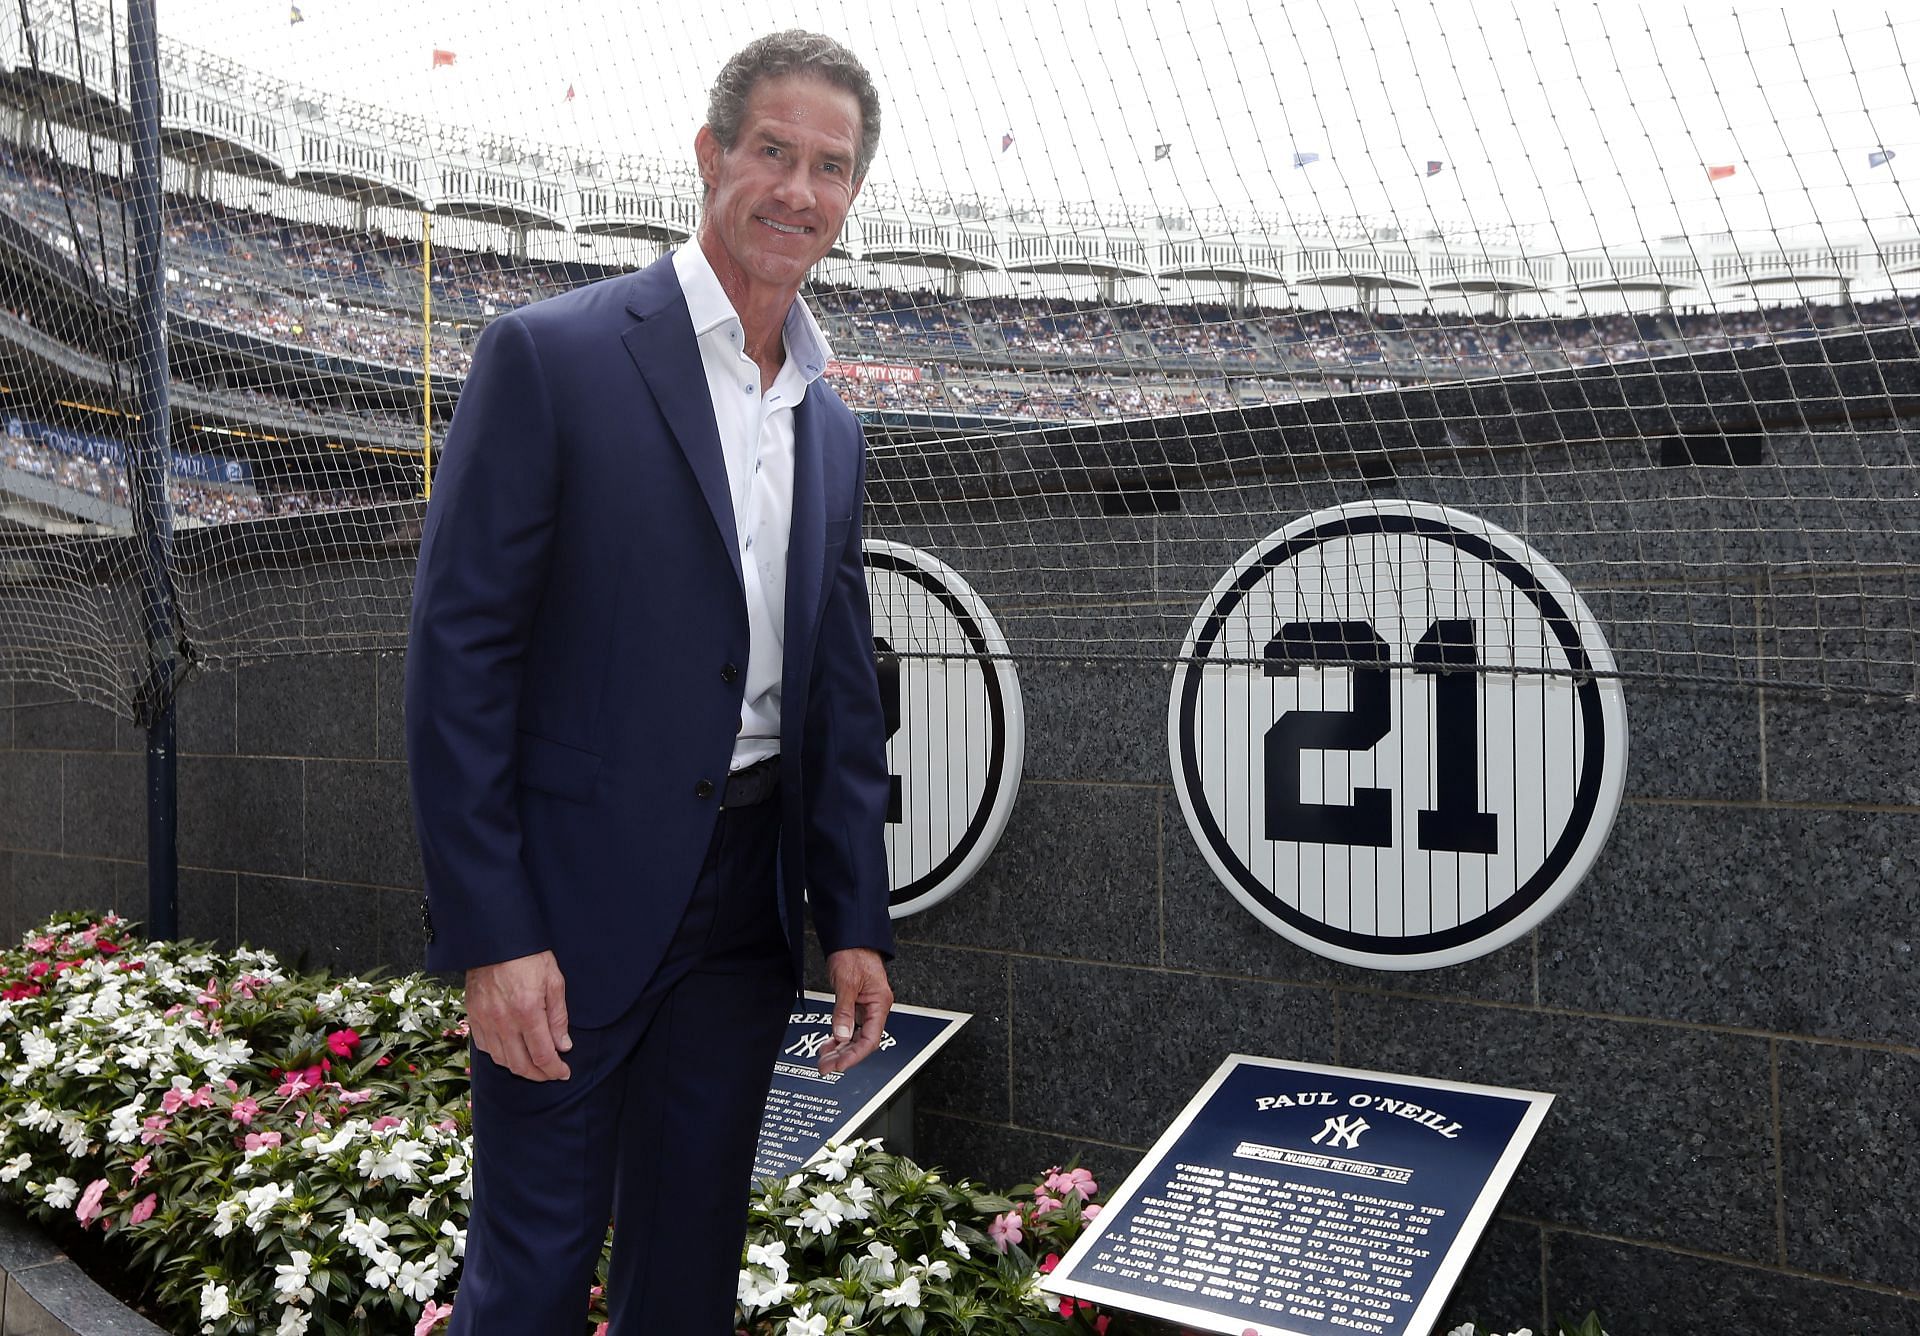 Paul O'Neill surprised Derek Jeter wasn't unanimous Hall of Fame selection